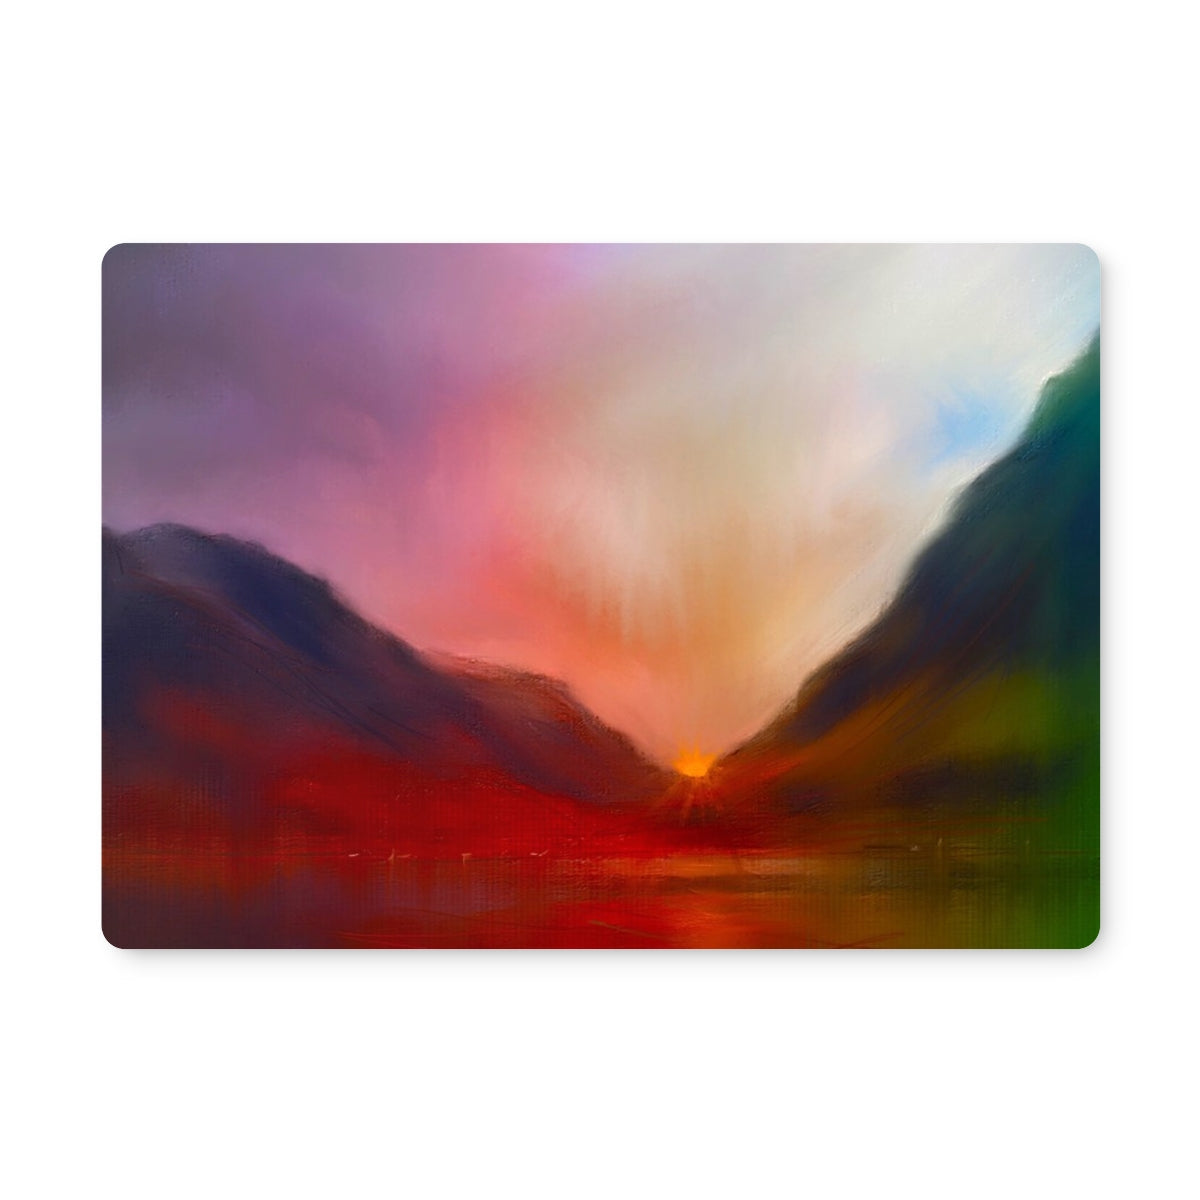 Glencoe Sunset Art Gifts Placemat-Placemats-Glencoe Art Gallery-4 Placemats-Paintings, Prints, Homeware, Art Gifts From Scotland By Scottish Artist Kevin Hunter